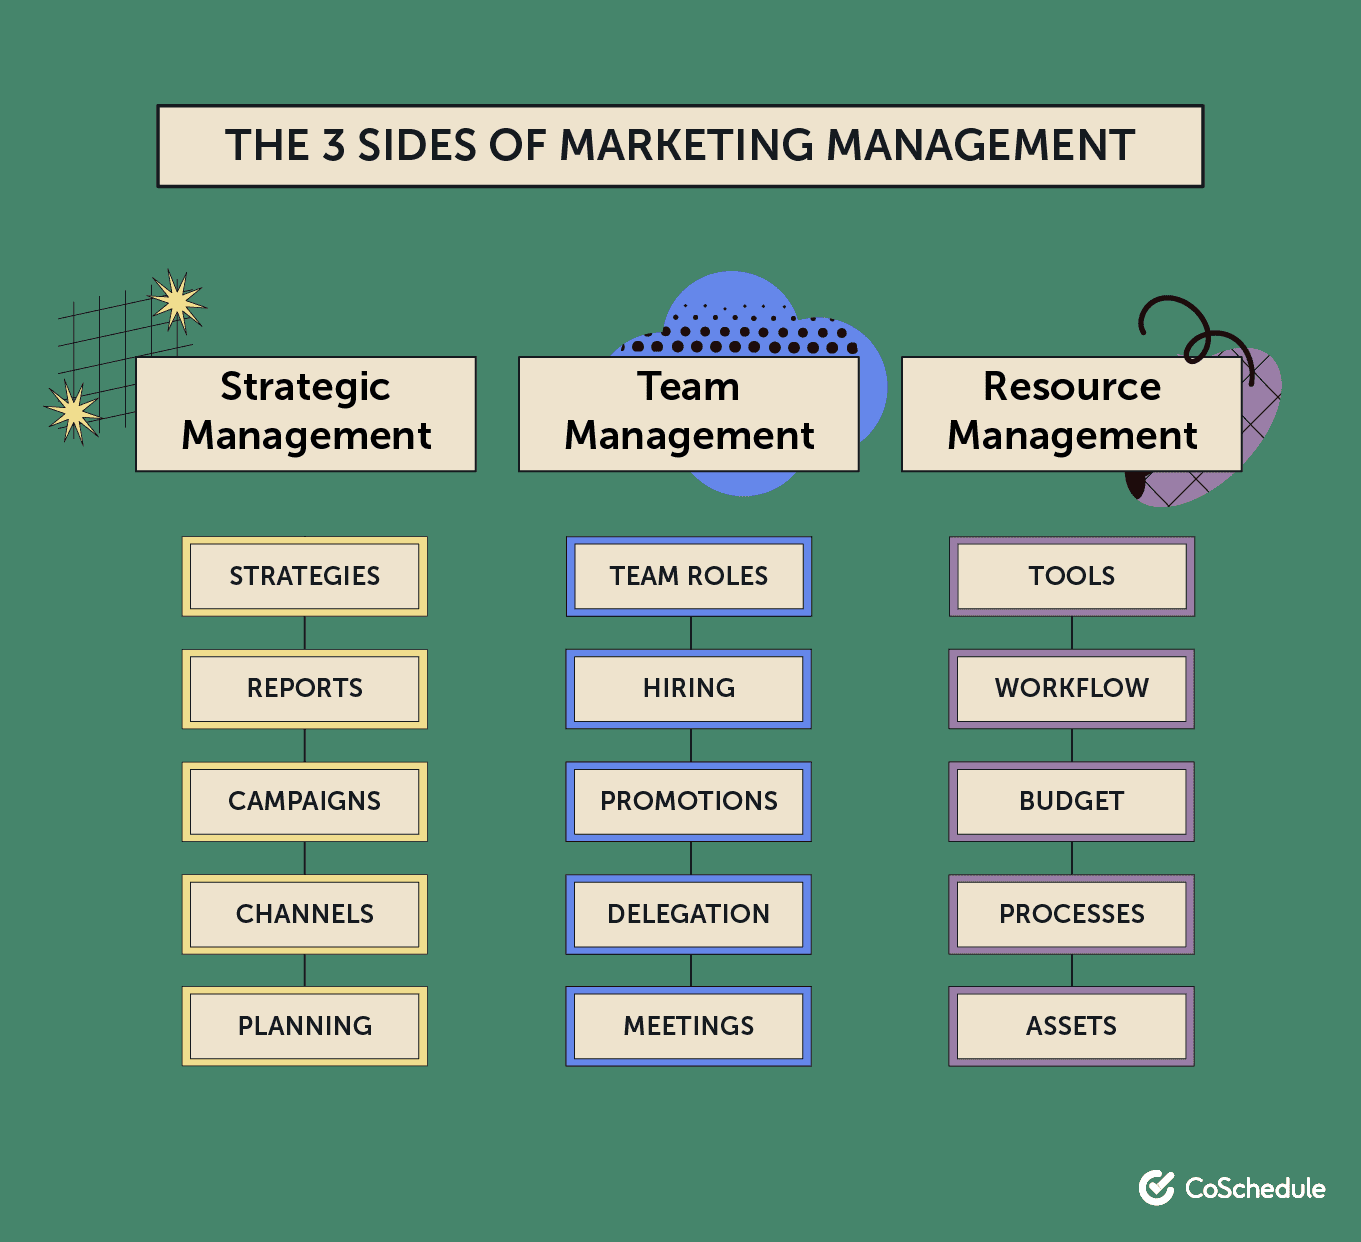 The 3 sides of marketing management